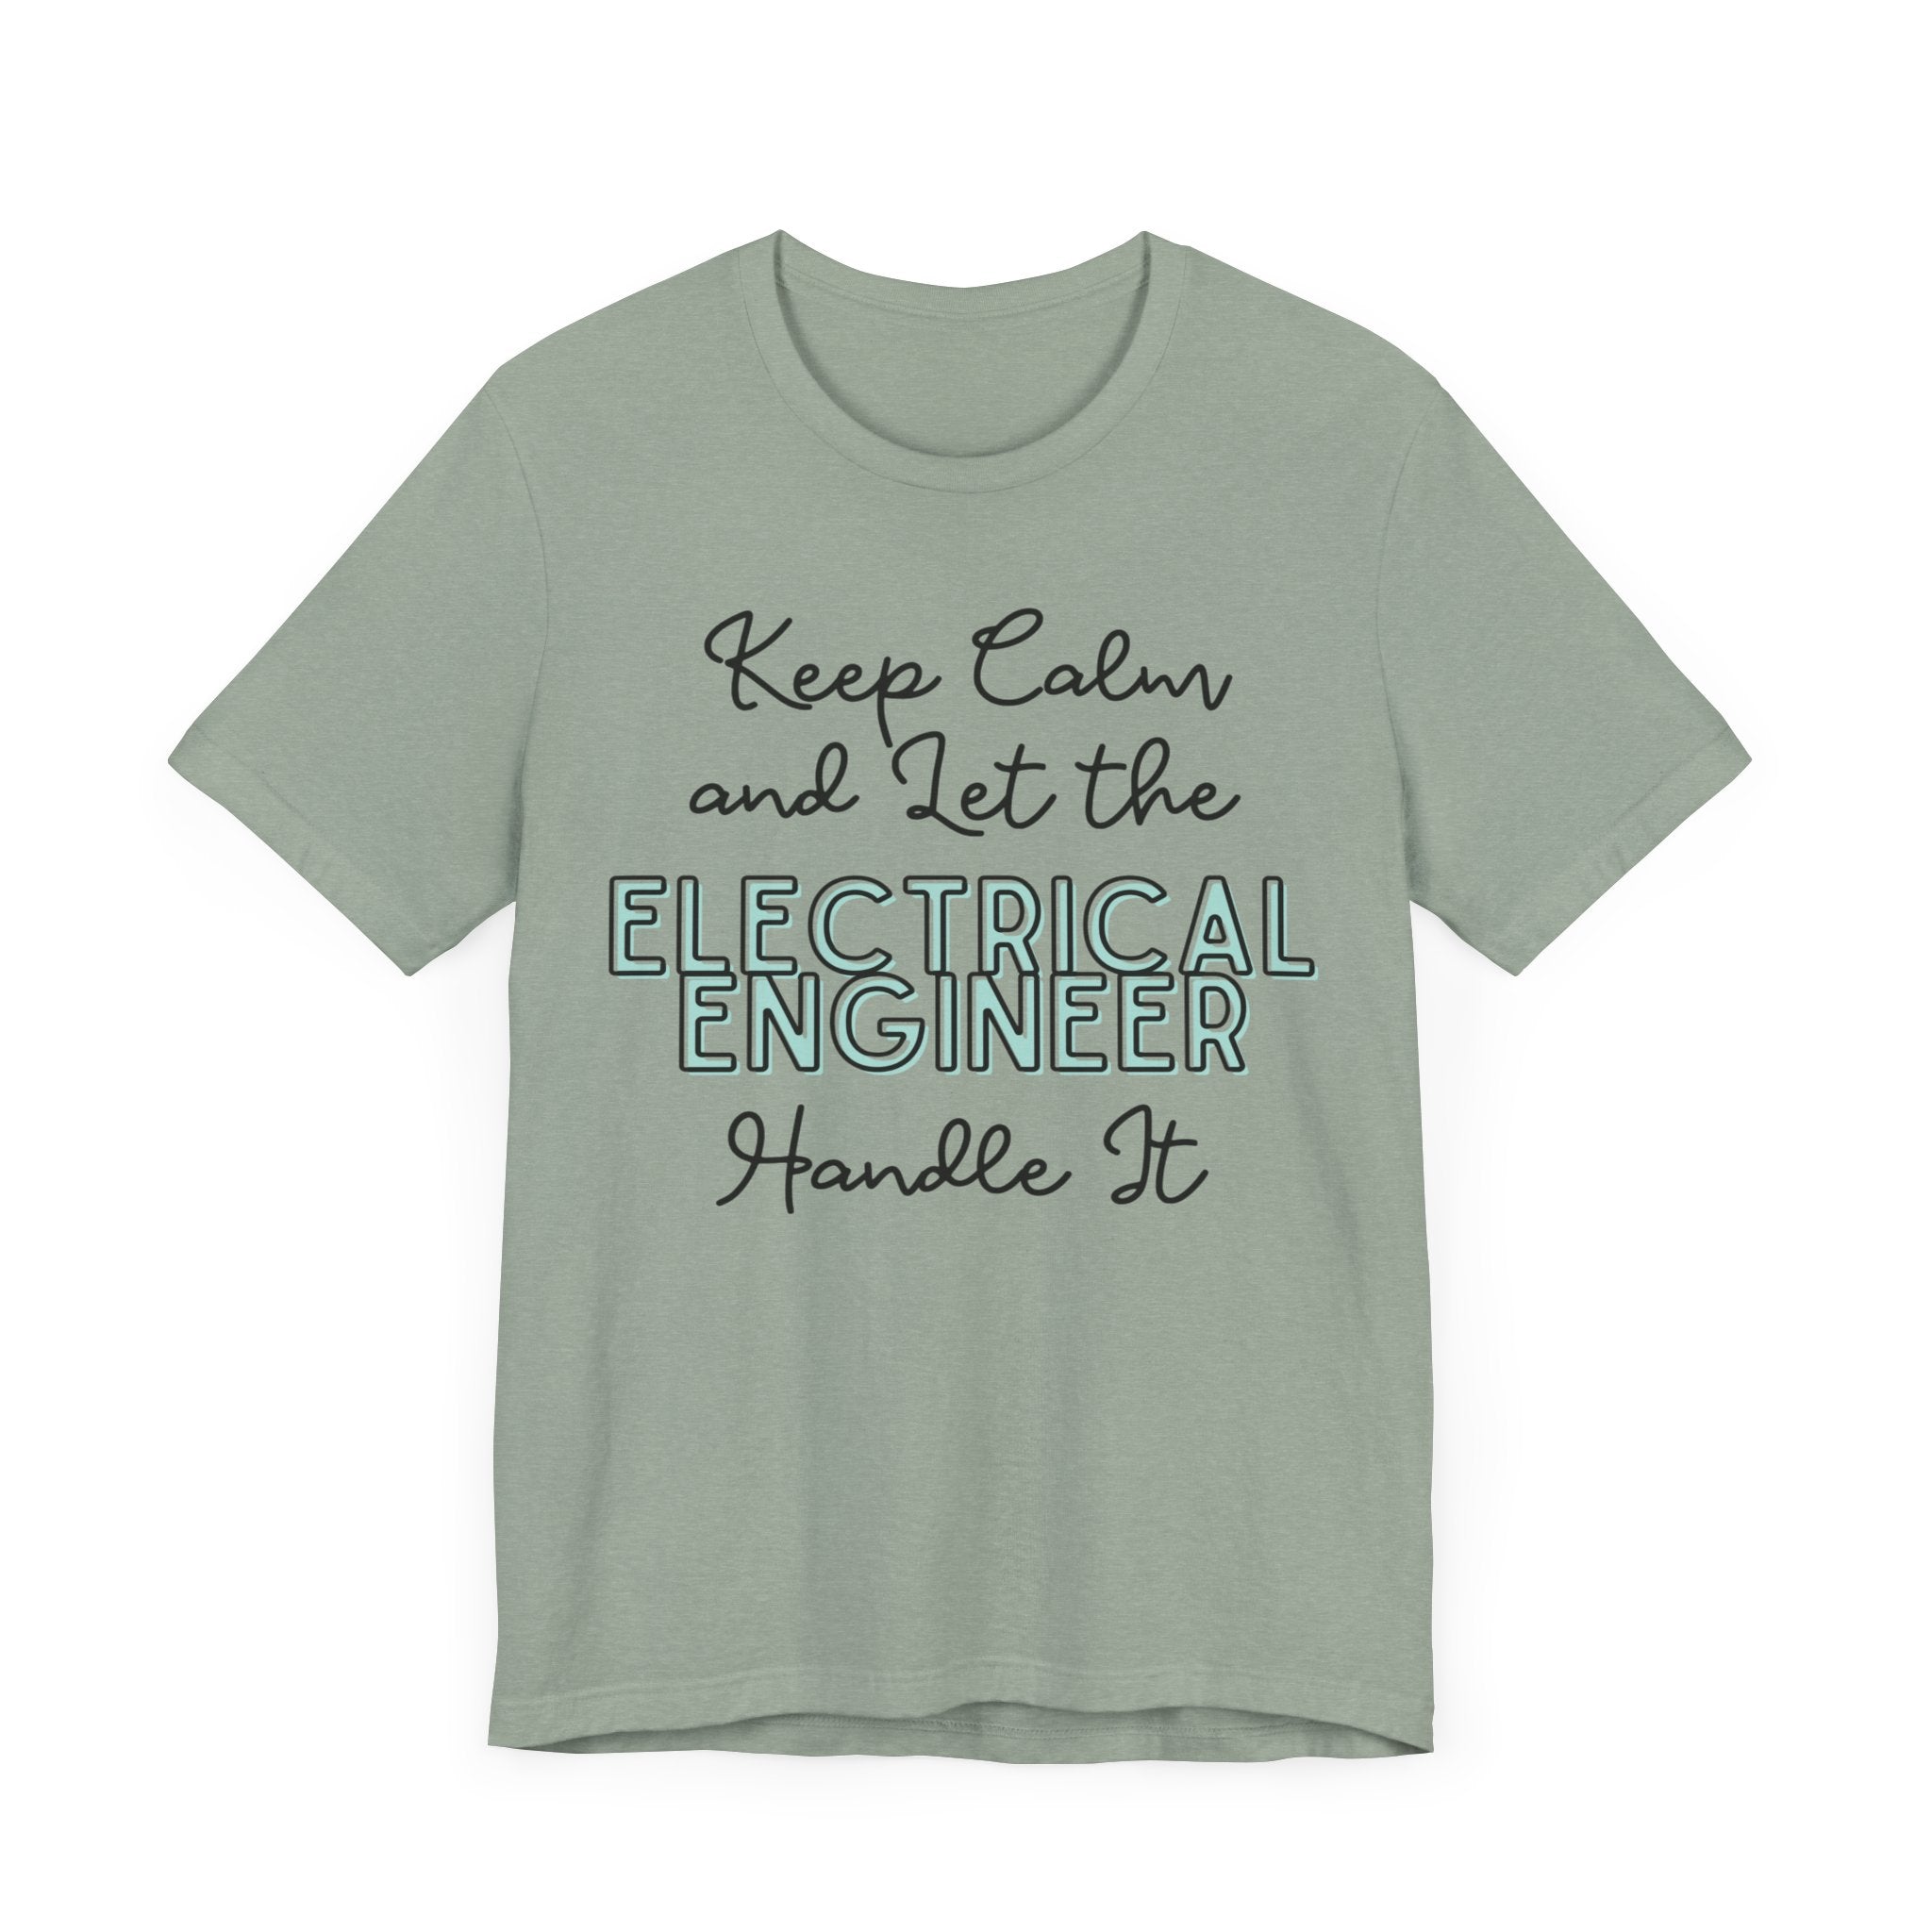 Keep Calm and let the Electrical Engineer handle It - Jersey Short Sleeve Tee